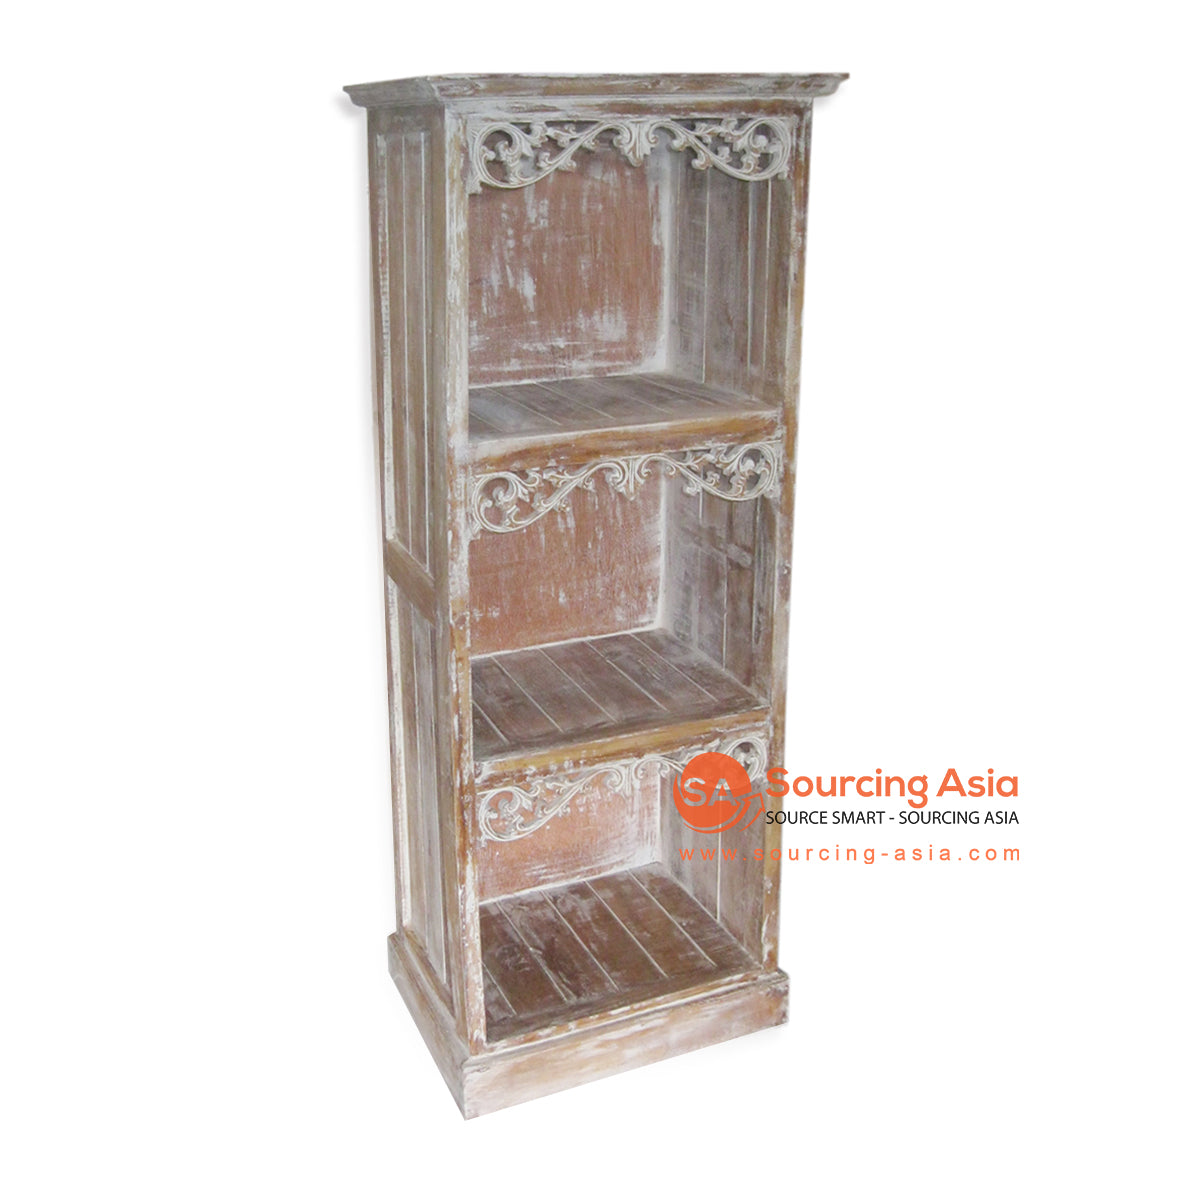 THE051-1 BROWN WASH WOODEN BOOK RACK WITH THREE SLOTS AND CARVING